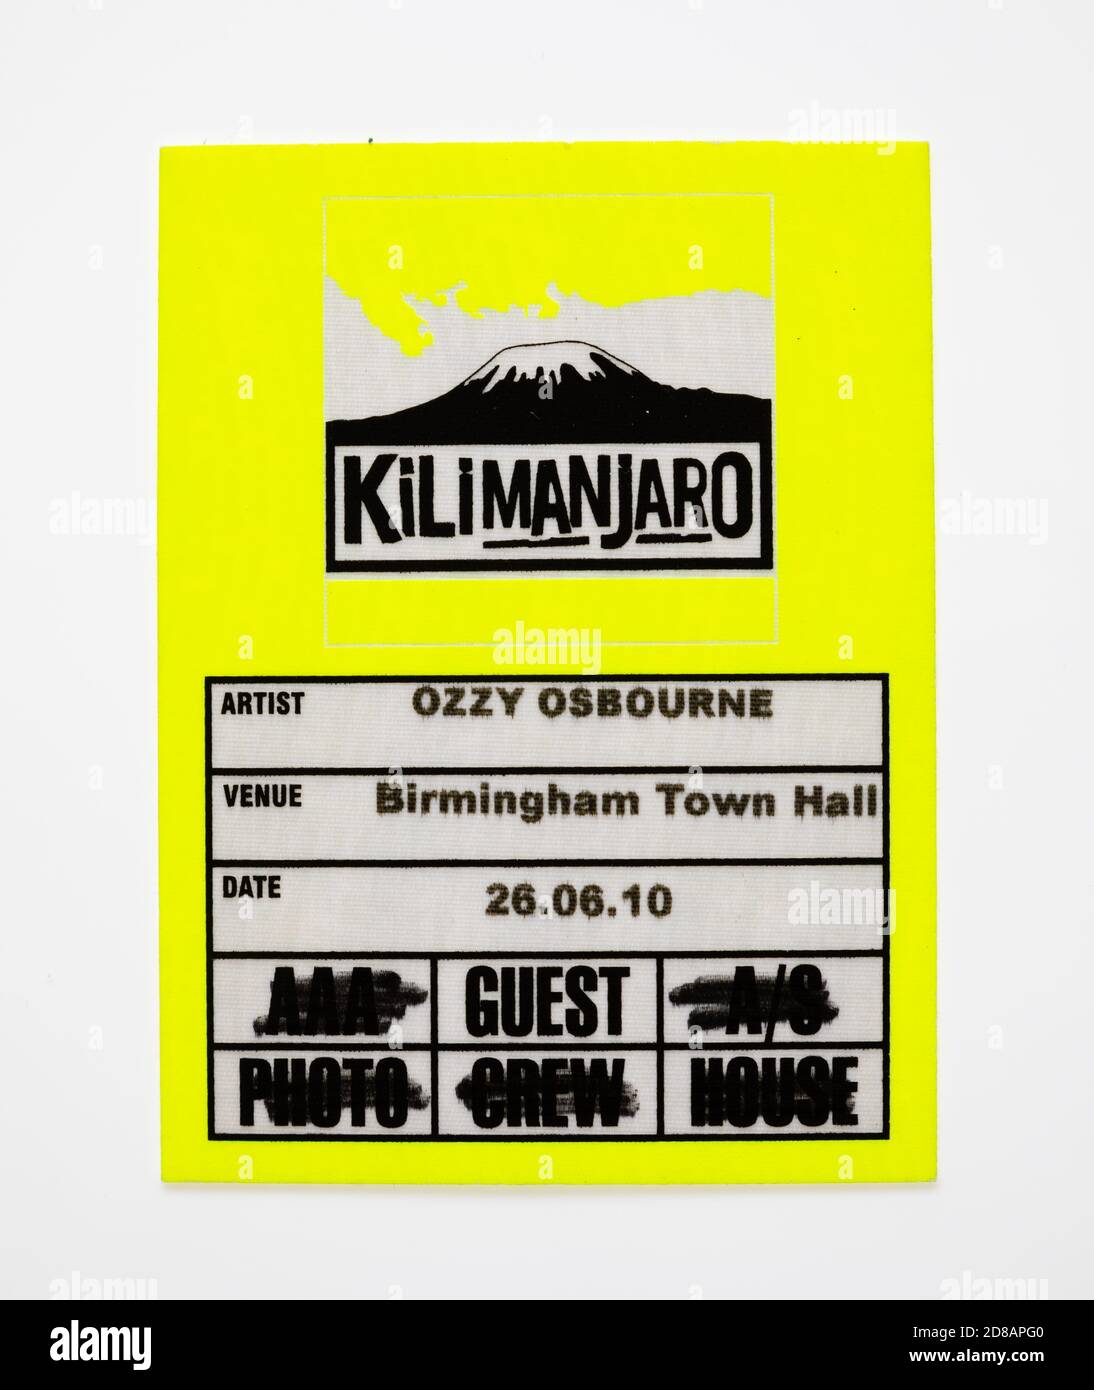 Ticket, guest pass to an Ozzy Osbourne gig at Birmingham Town Hall, England. 26th June 2010. * This is a stock photo.. Not a ticket * Stock Photo